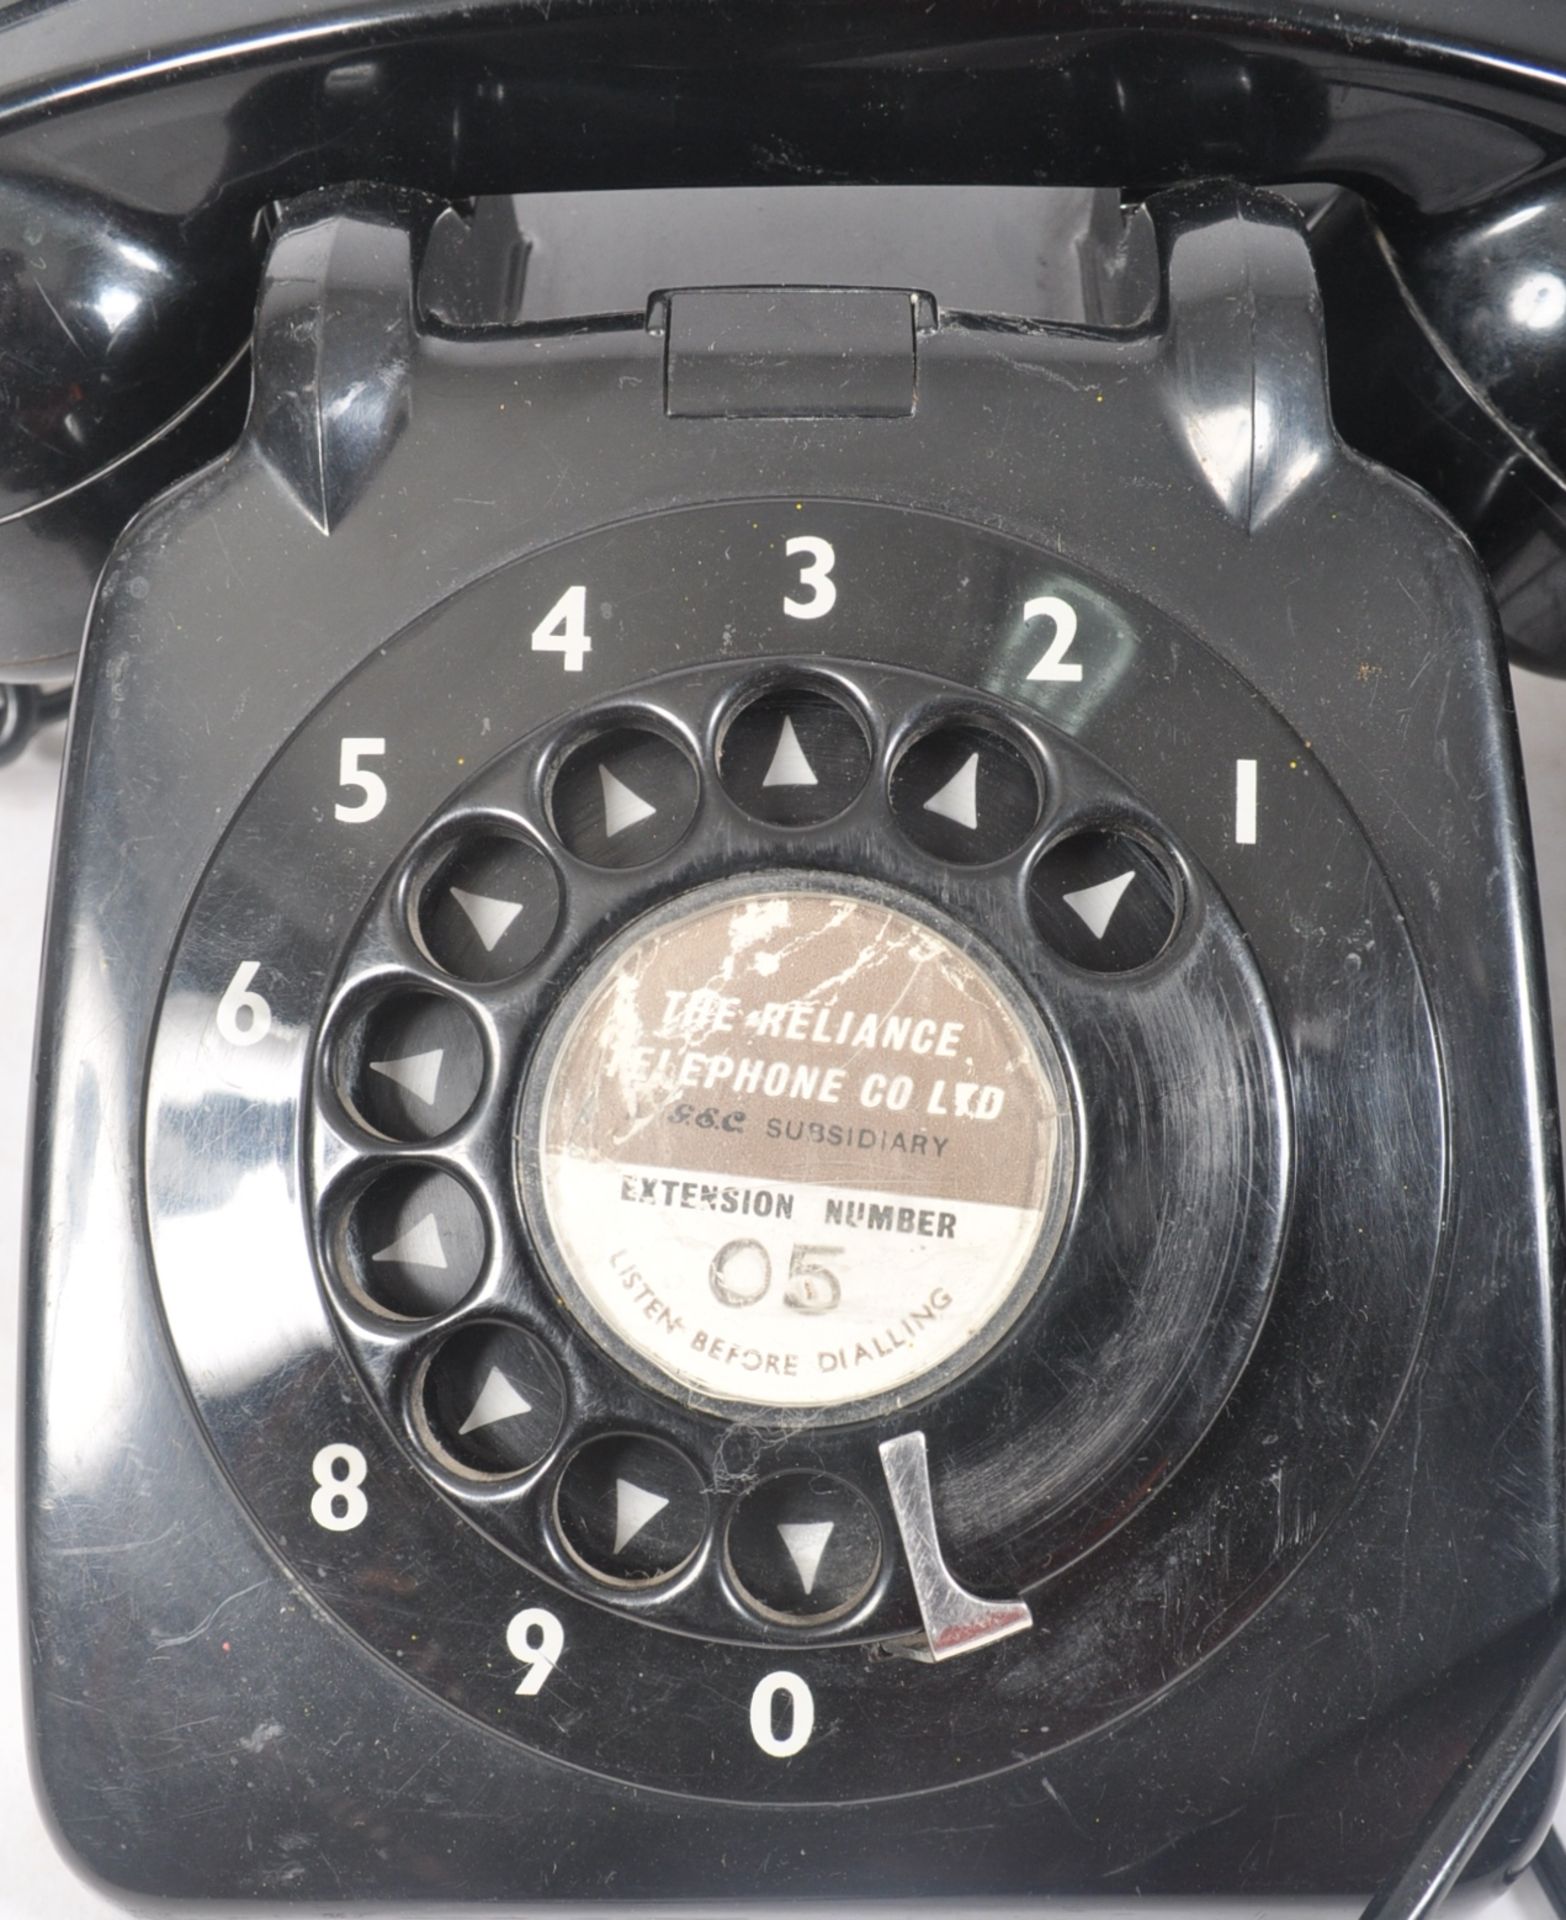 COLLECTION OF NINE VINTAGE 1970S ROTARY DIAL GPO TELEPHONES - Image 3 of 8